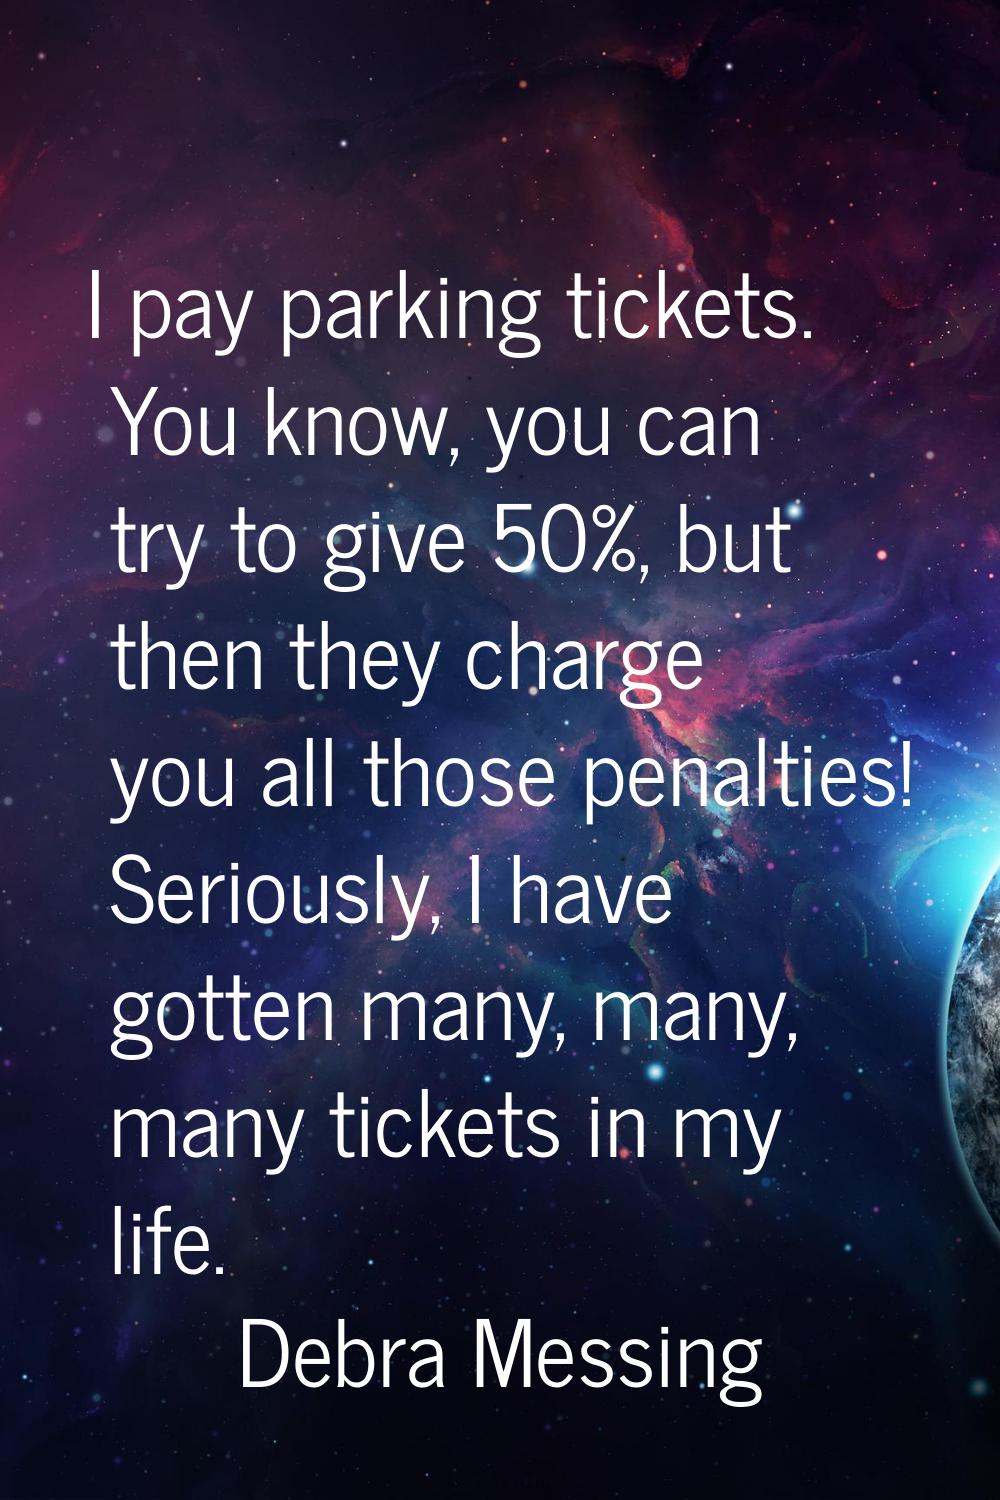 I pay parking tickets. You know, you can try to give 50%, but then they charge you all those penalt